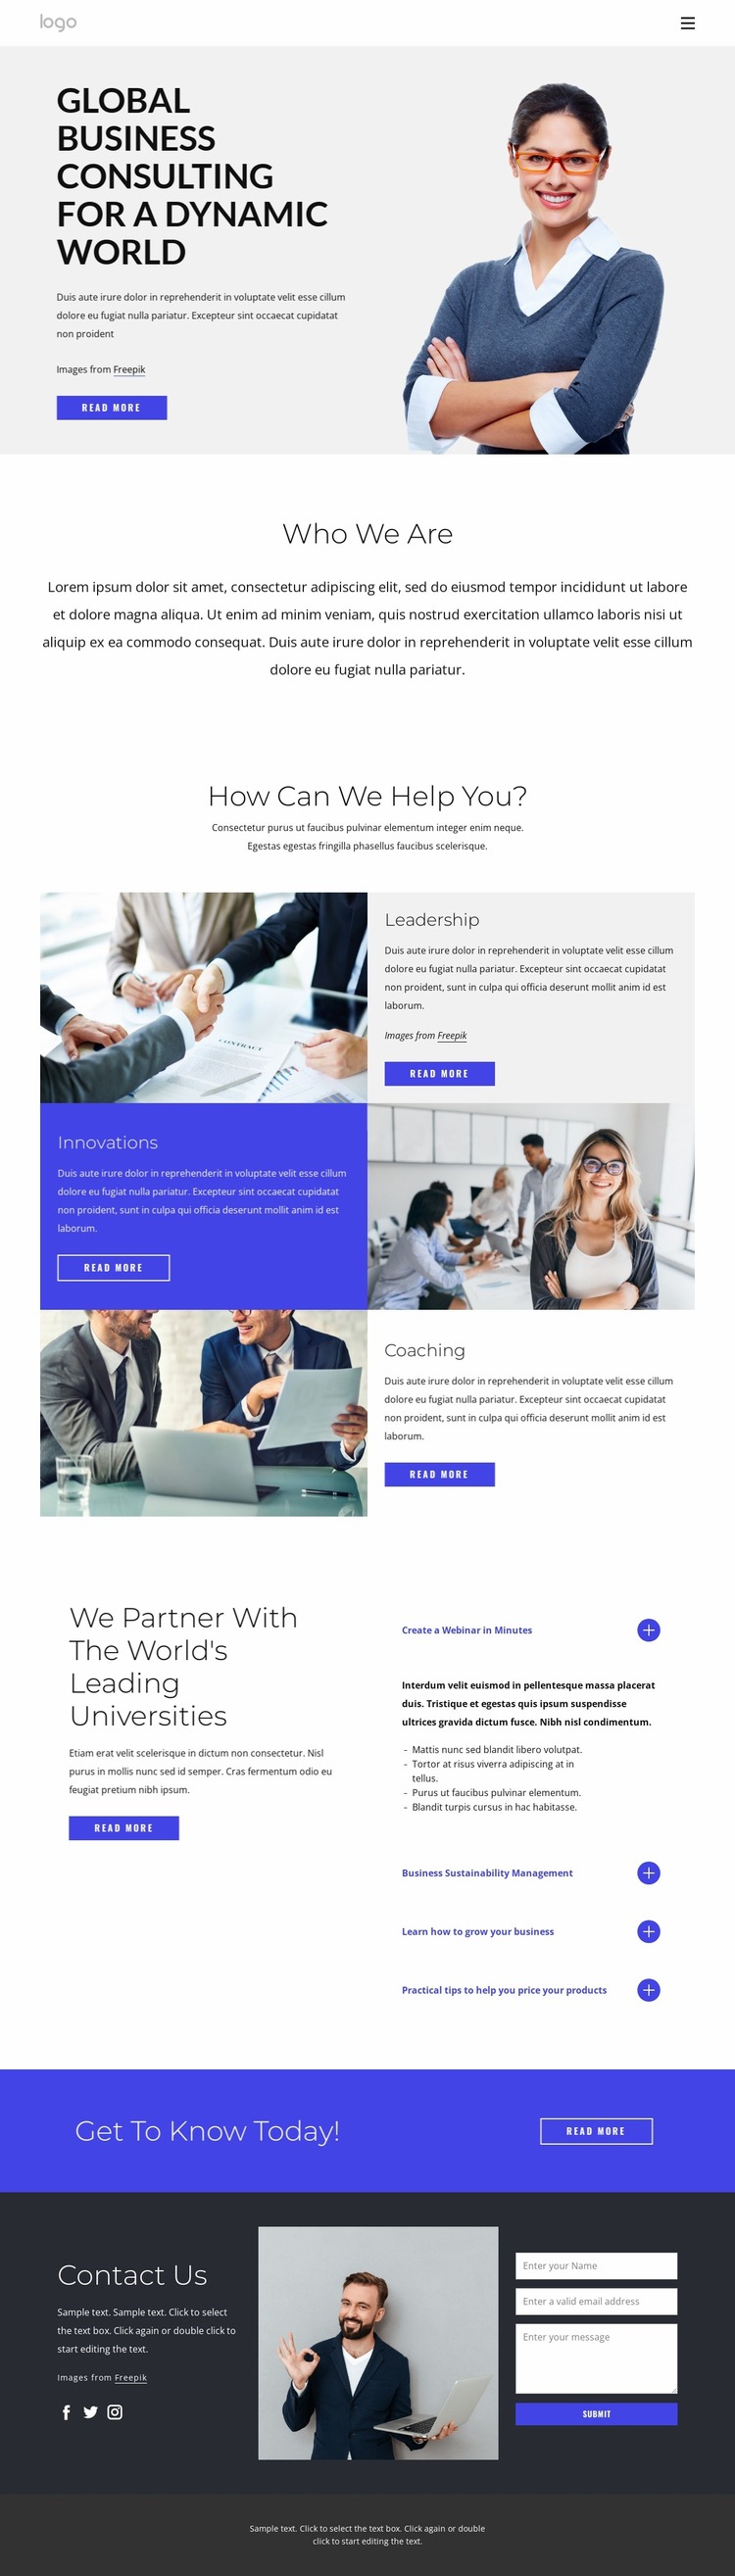 Global business consulting Website Mockup